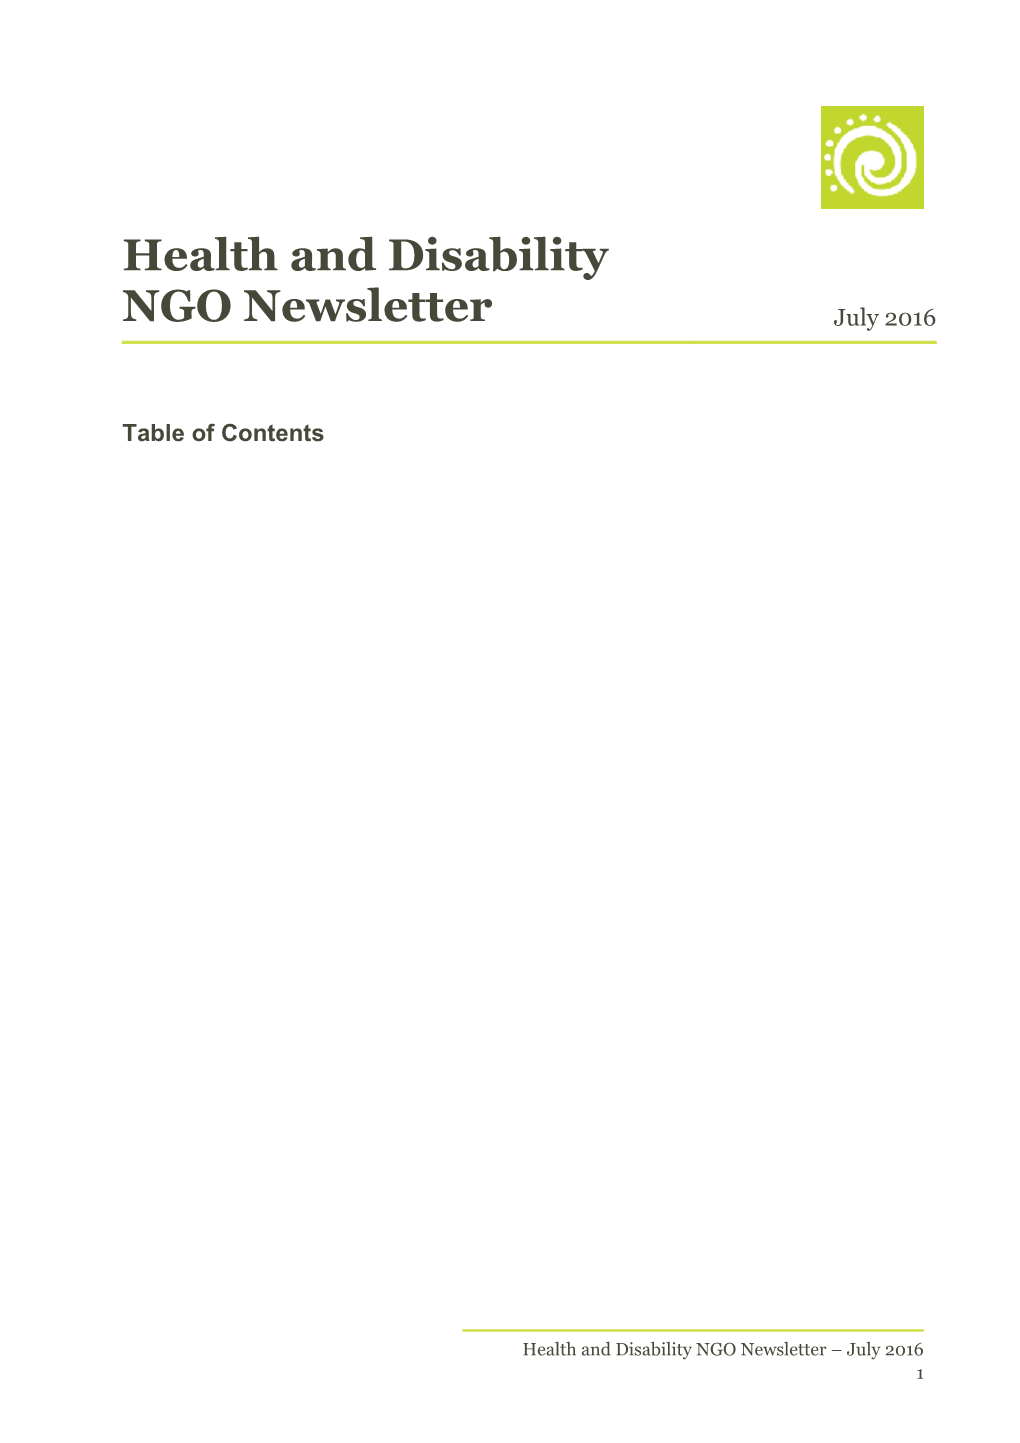 Health and Disability NGO Newsletter